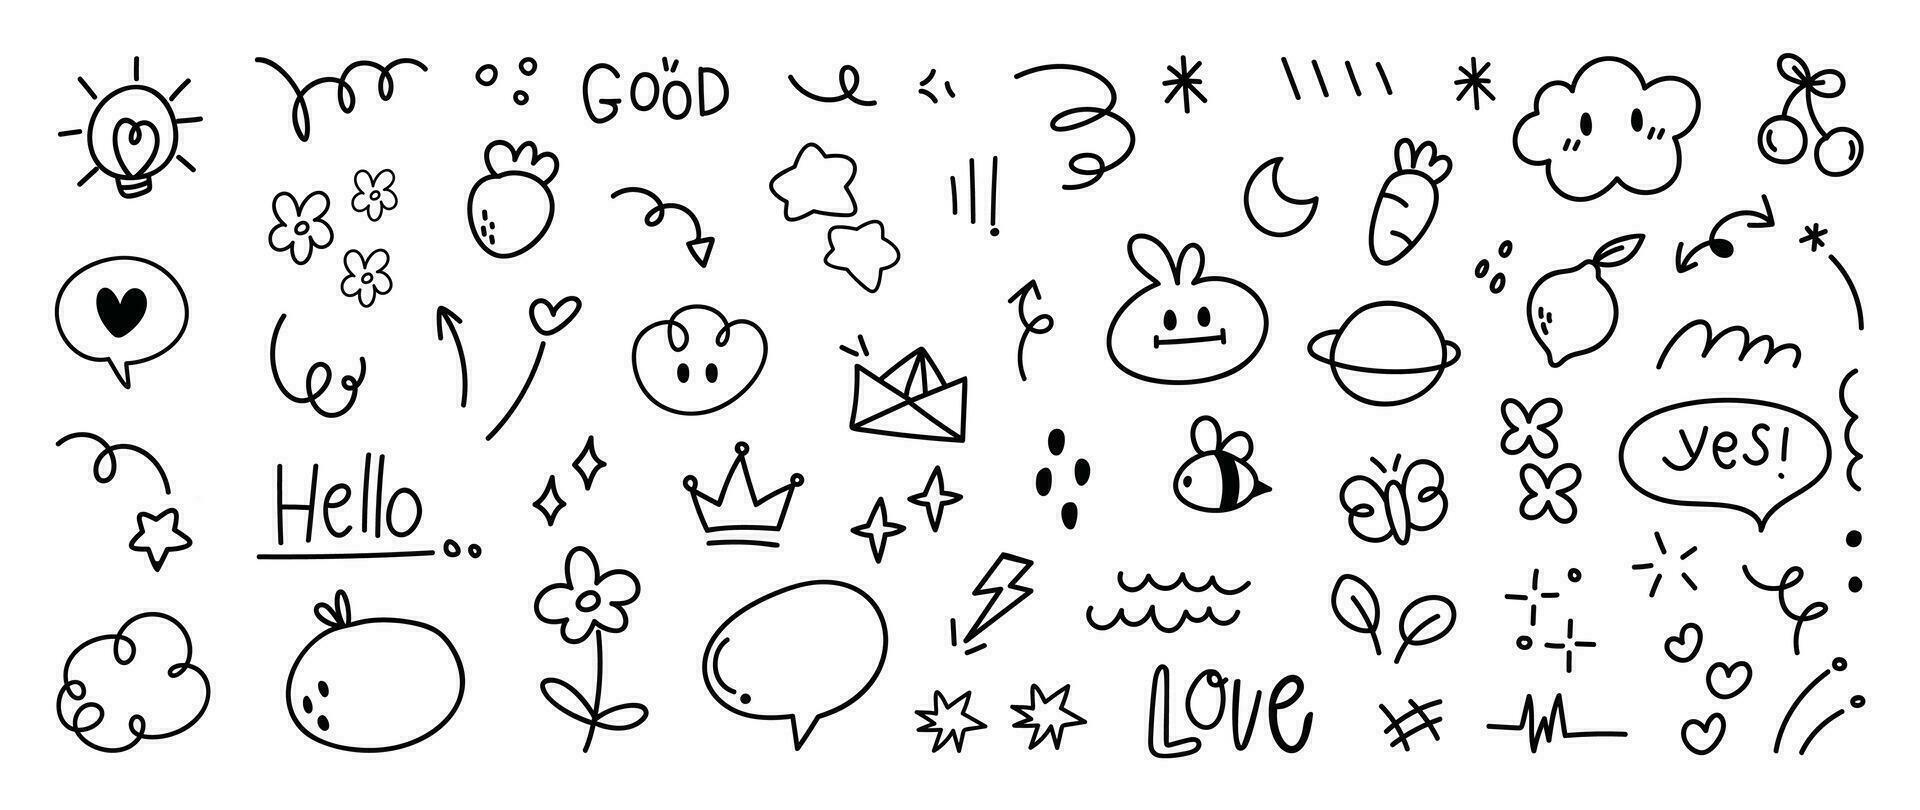 Set of cute pen line doodle element vector. Hand drawn doodle style collection of heart, arrows, scribble, speech bubble, star, butterfly, words. Design for print, cartoon, card, decoration, sticker. vector